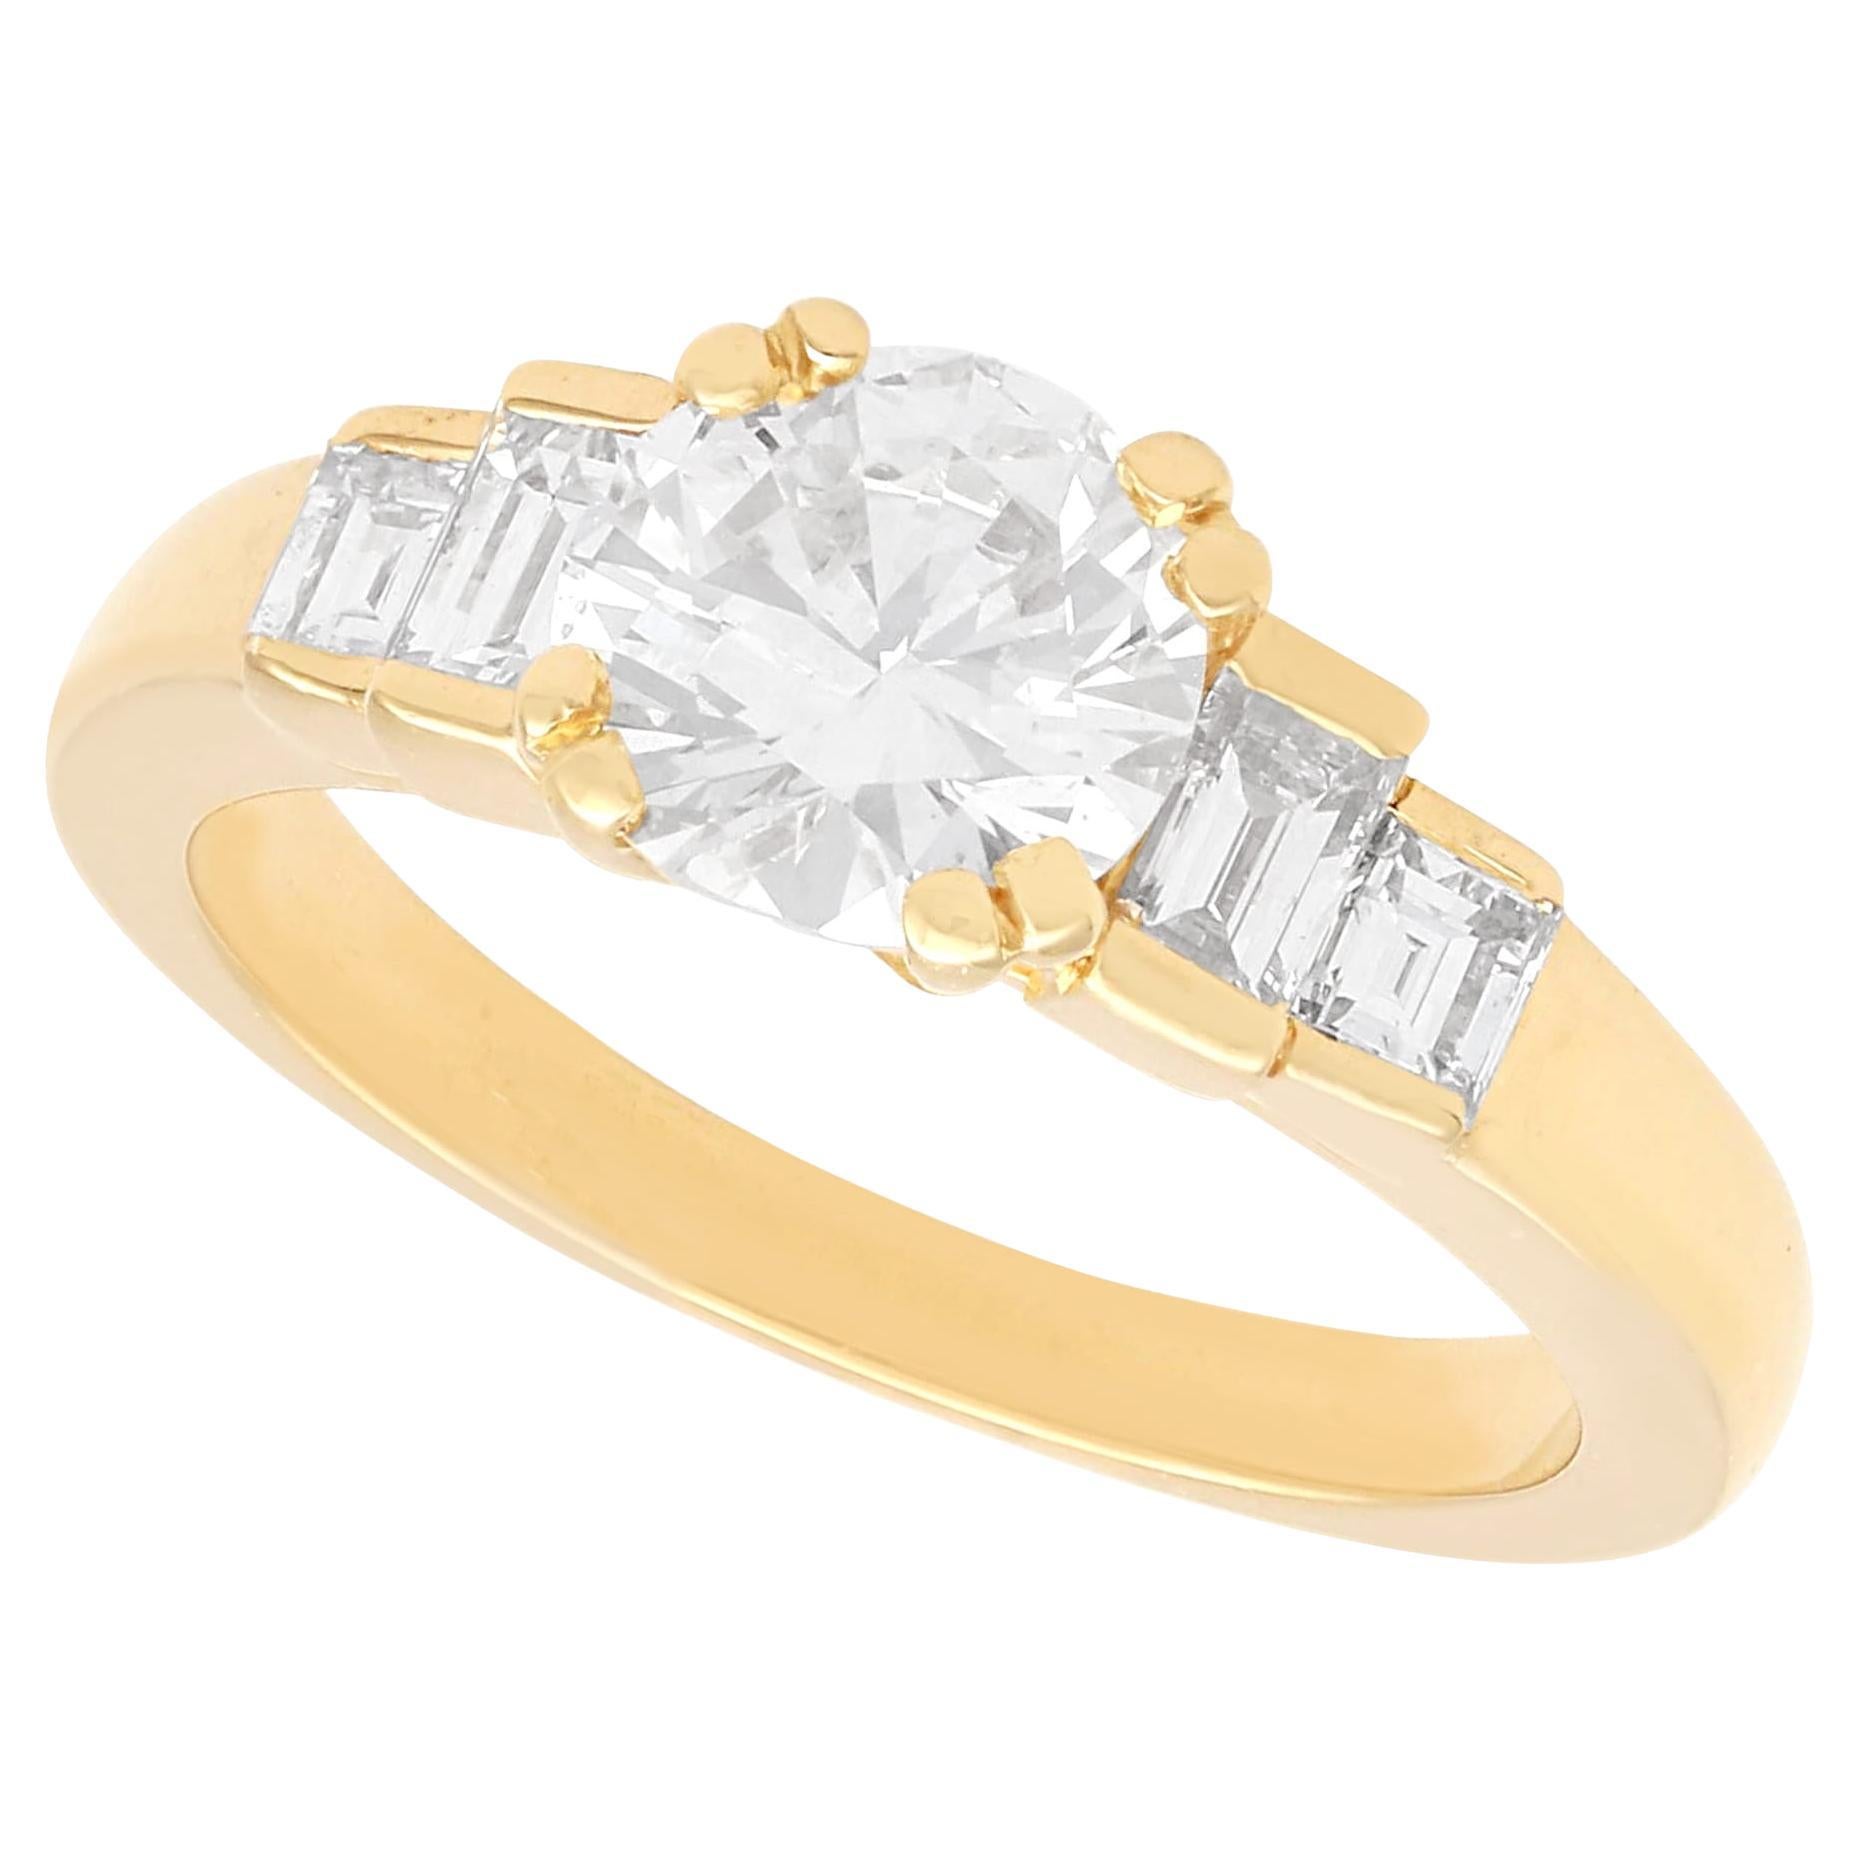 Vintage French 1.38 Carat Diamond and Yellow Gold Solitaire Ring